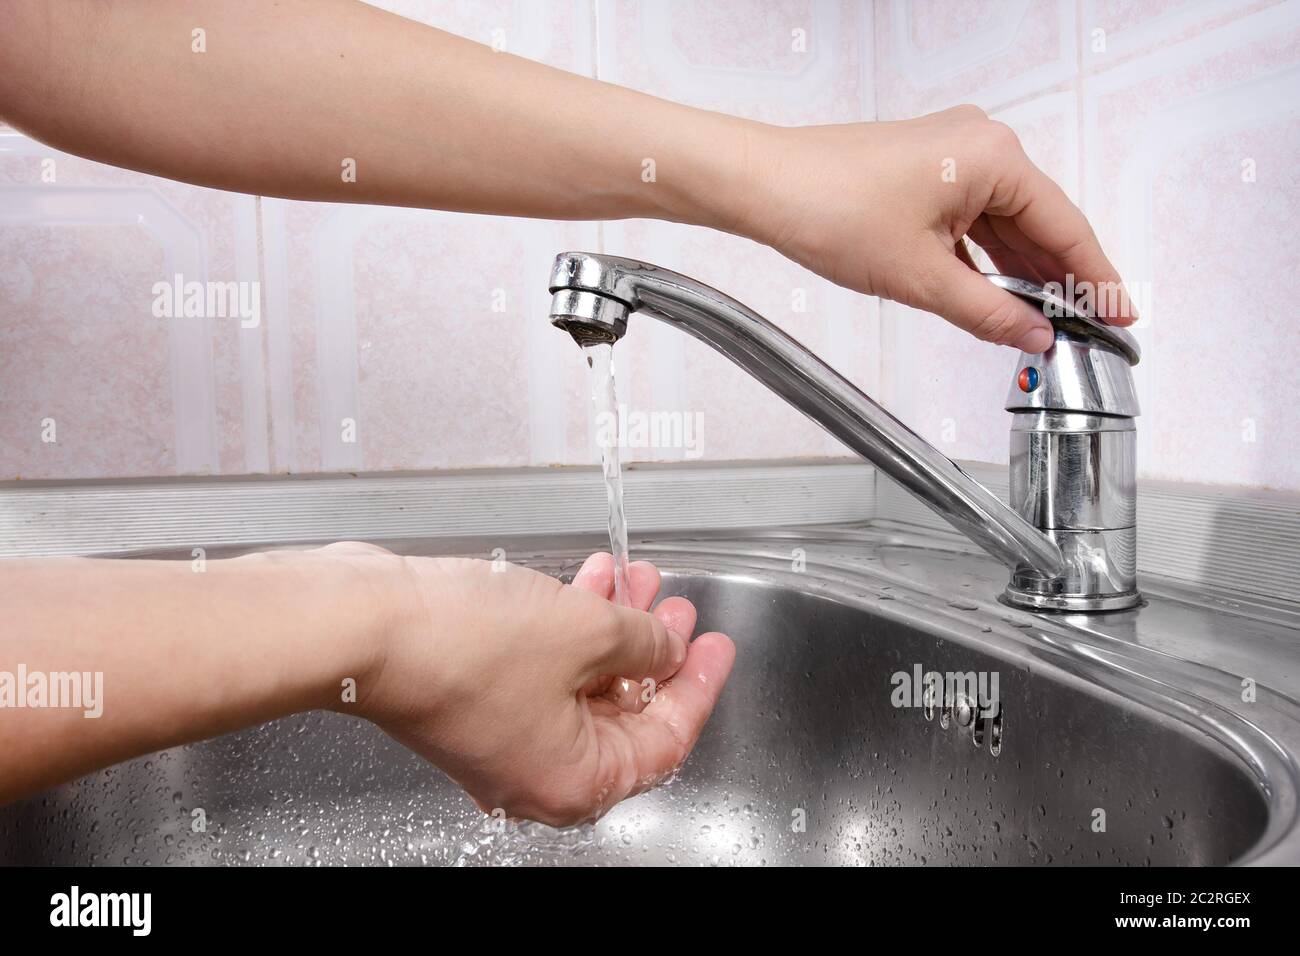 Women's hand turn on a faucet Stock Photo